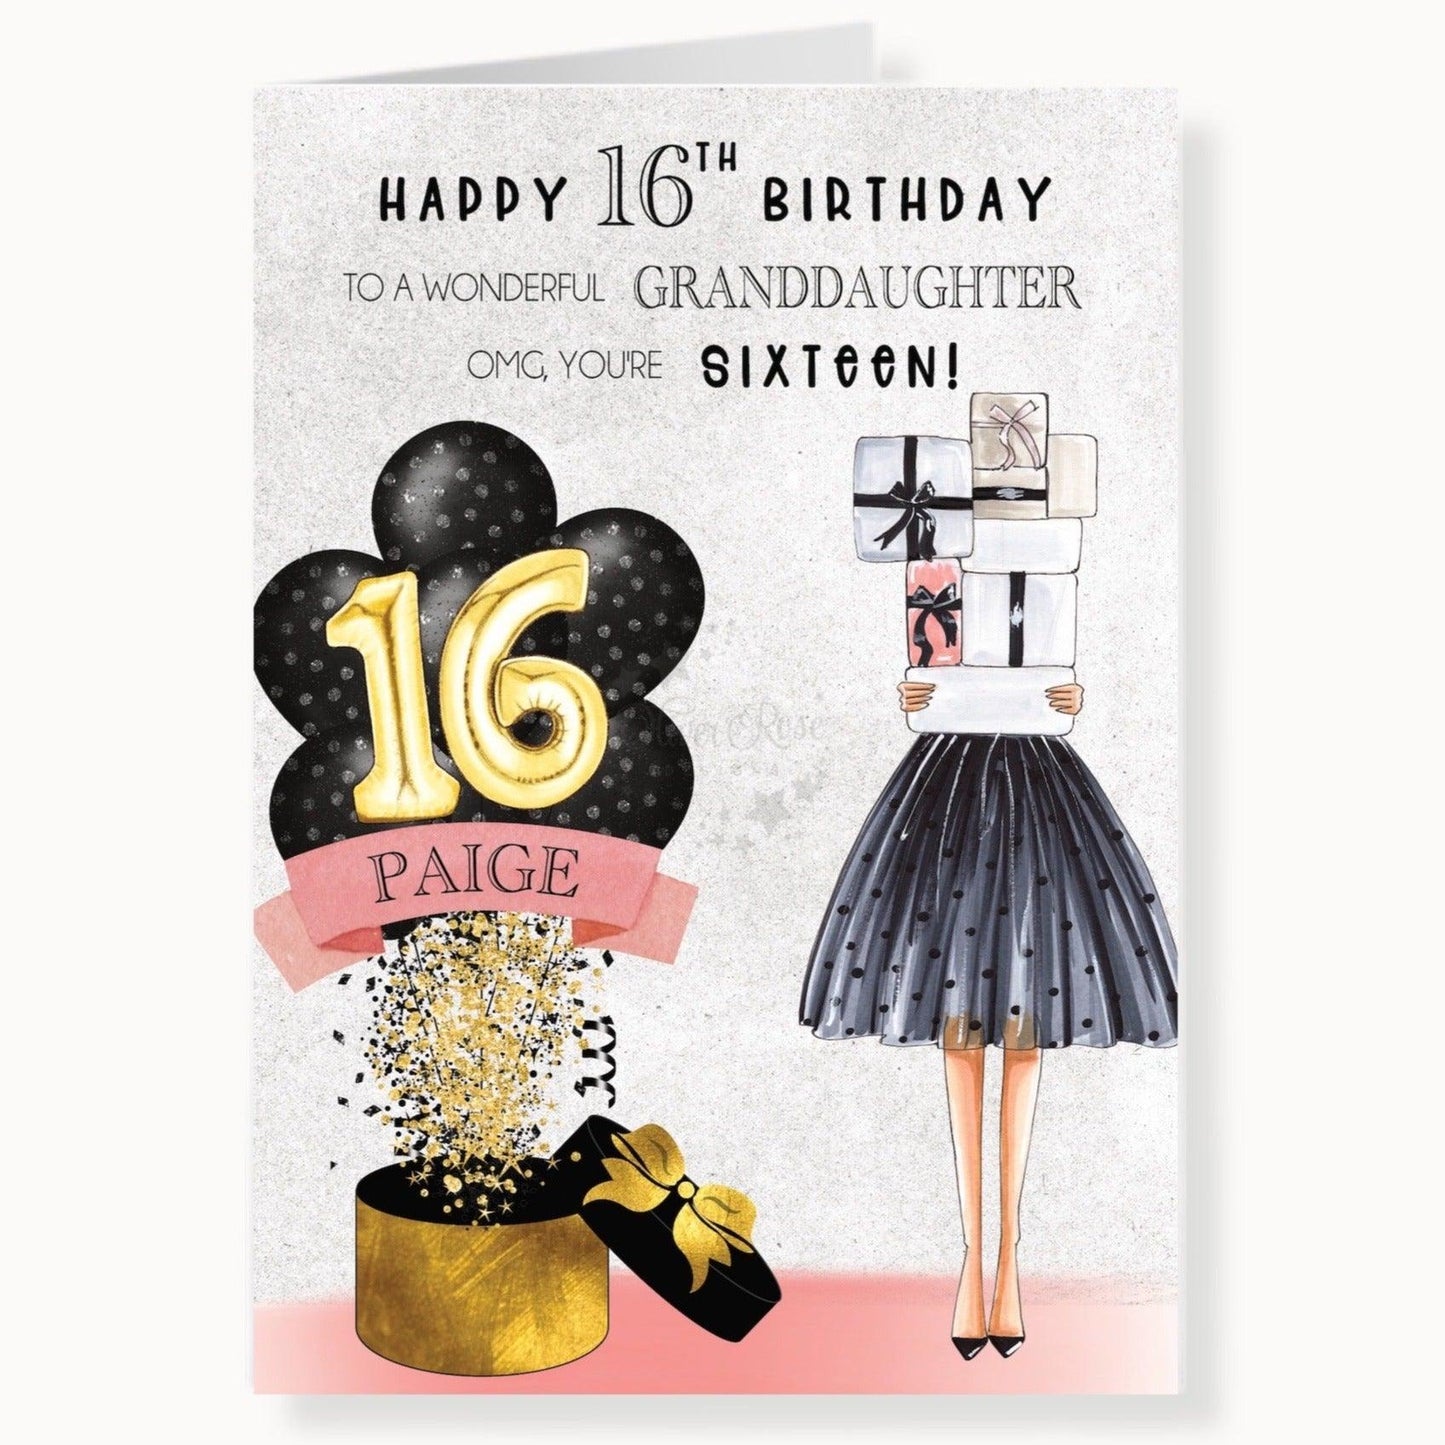 Polka Dot Balloons 16th Birthday Card, Personalised with Name of your choice, To A Wonderful Granddaughter, OMG You're Sixteen, Black Polka Dot Balloons with Girl holding gifts wearing a black polka dot skirt